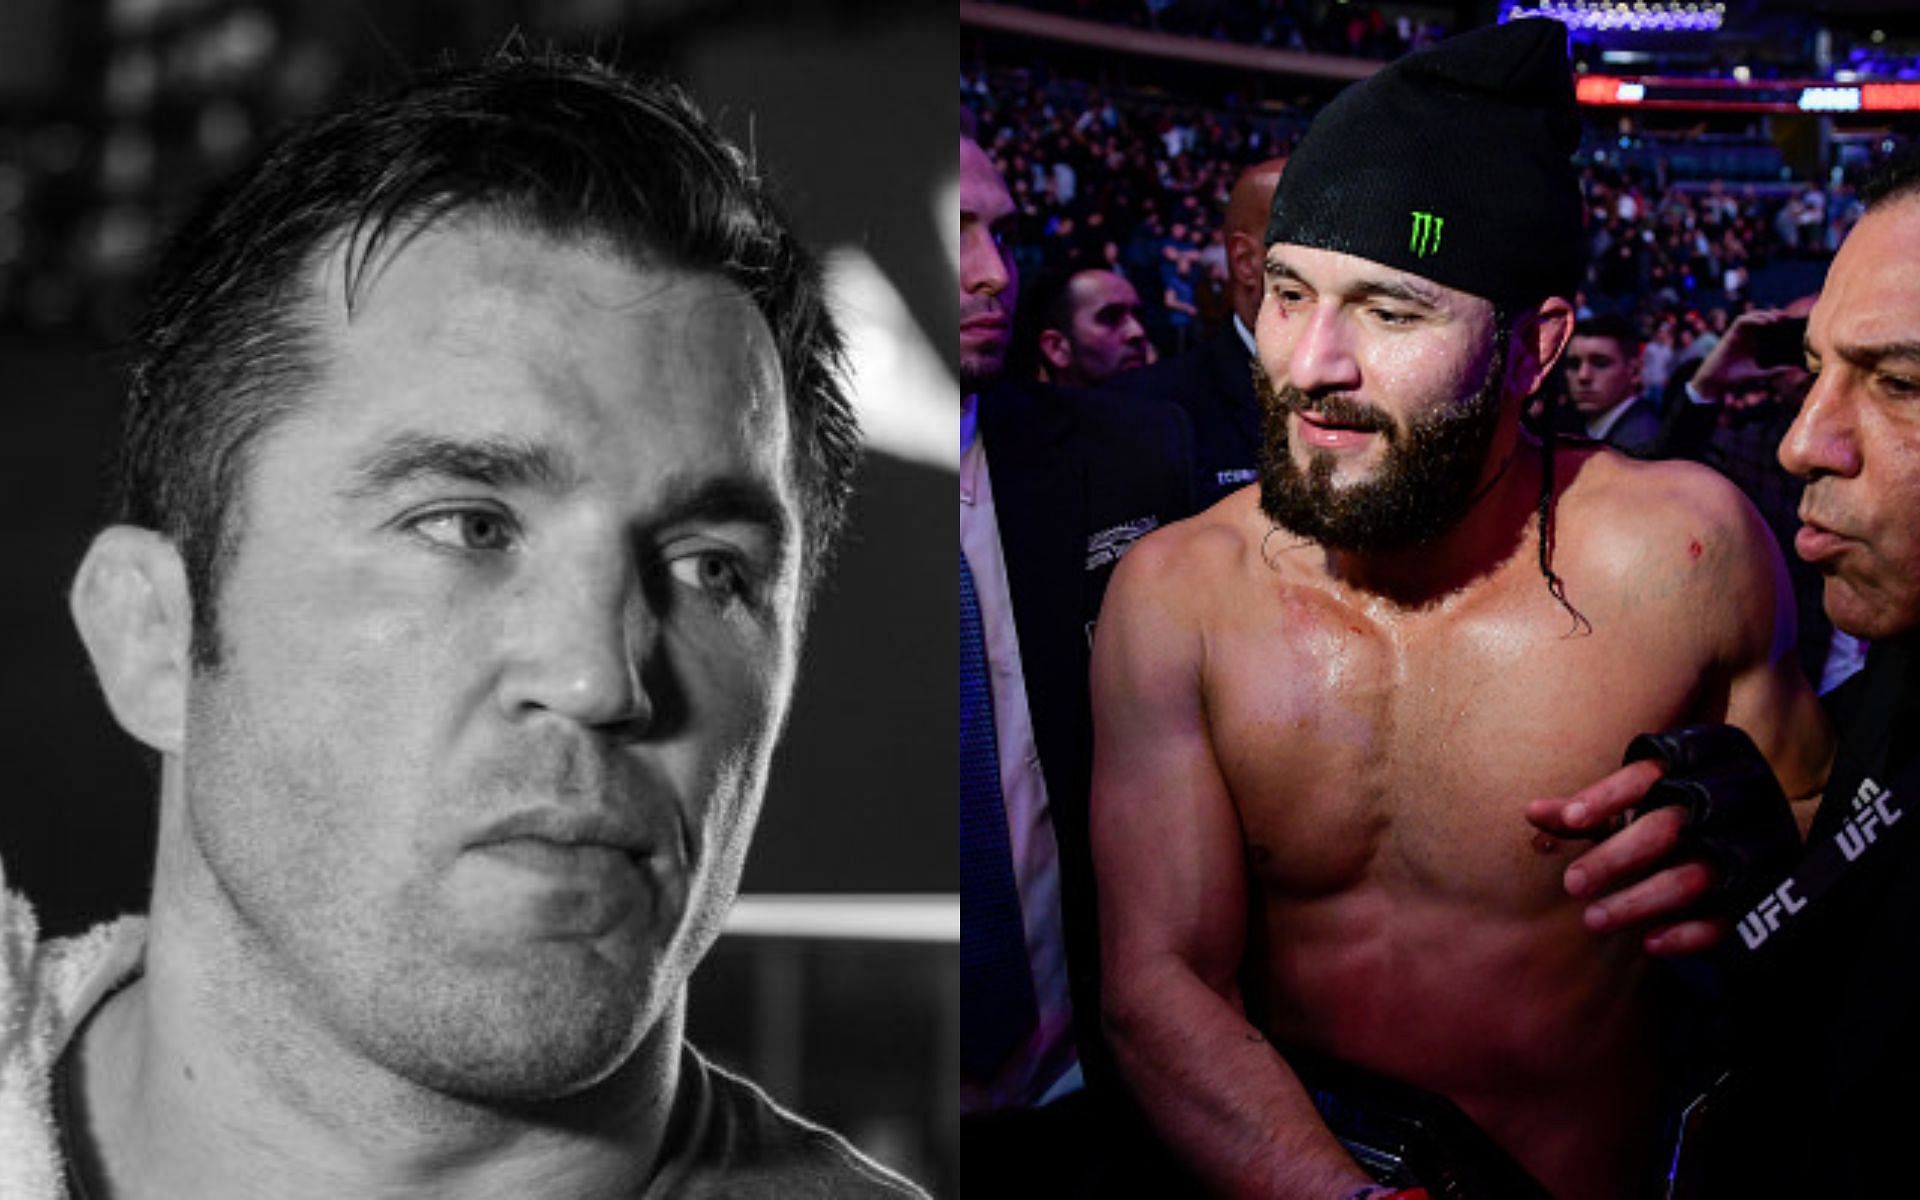 Chael Sonnen calls out Jorge Masvidal [Image credits: @ChaelSonnen/Twitter, Getty Images]